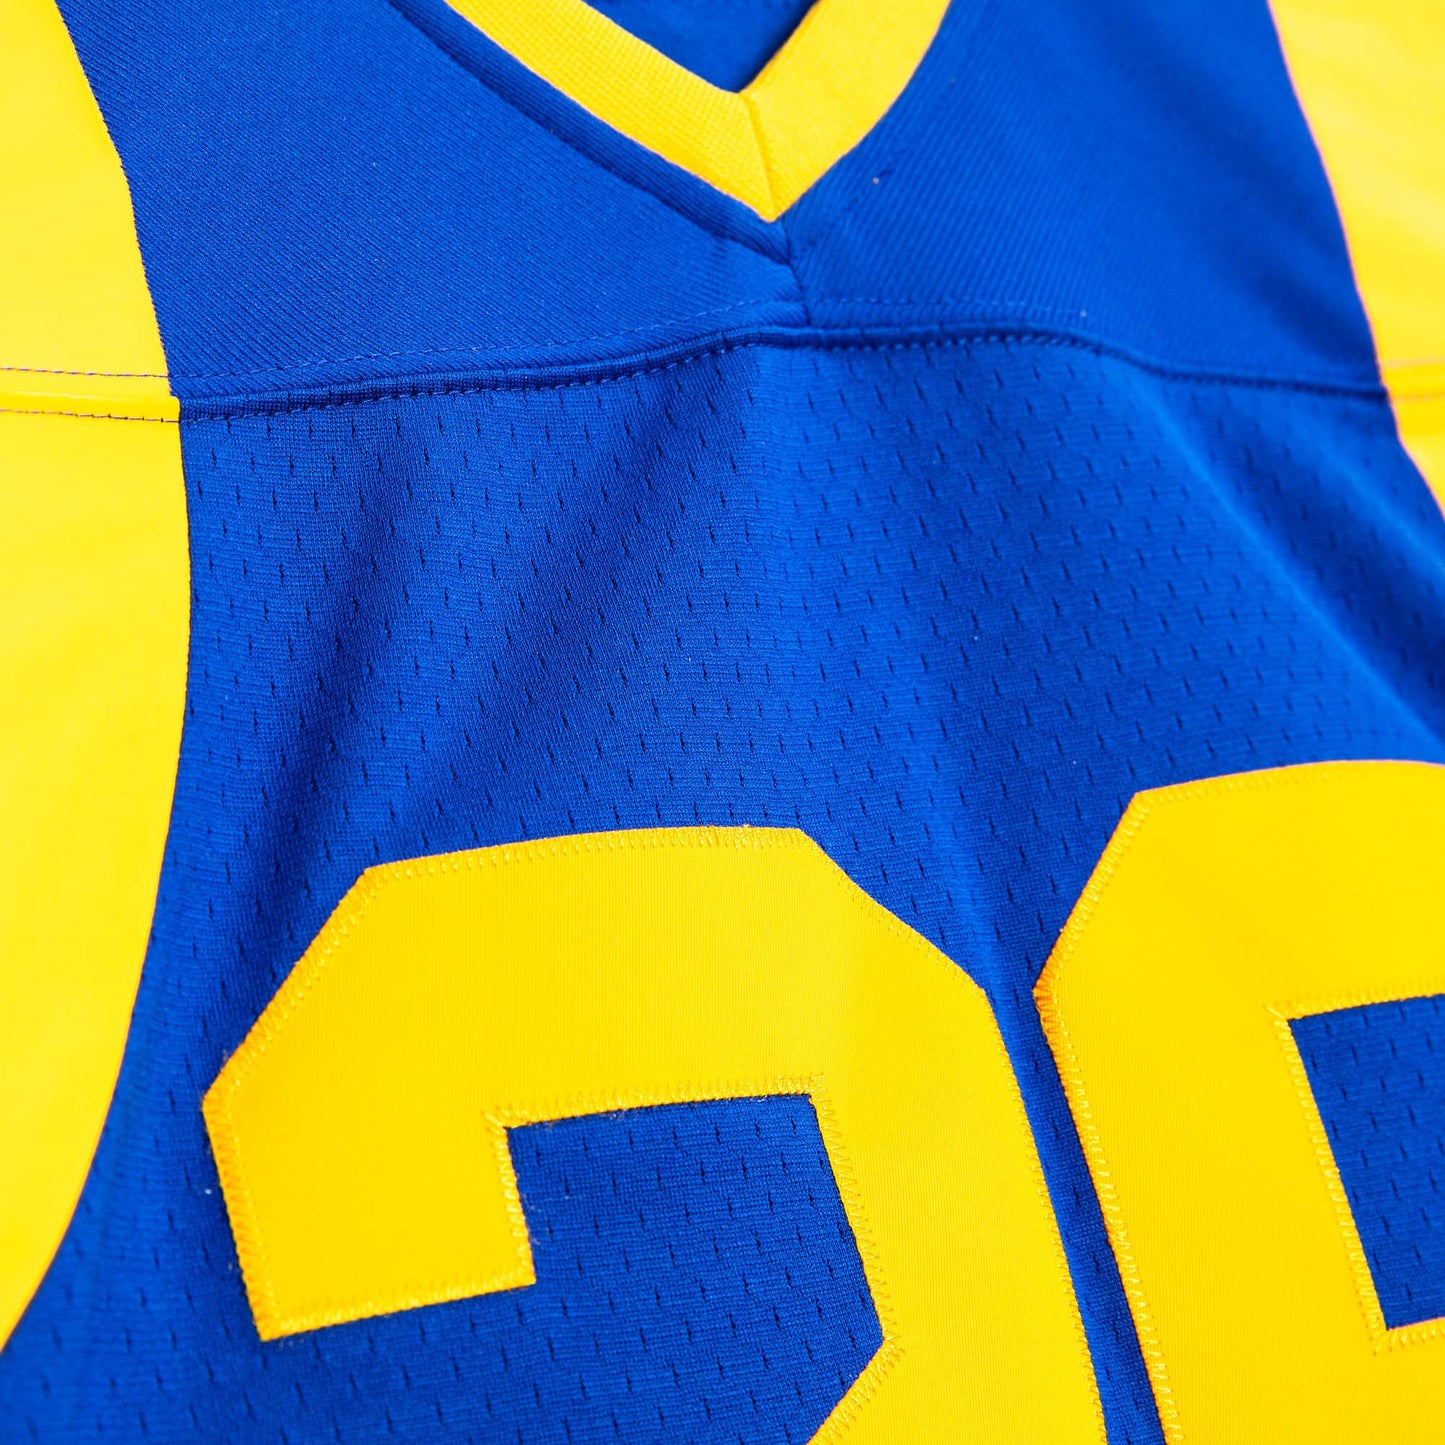 ERIC DICKERSON WOMEN'S MITCHELL & NESS LEGACY JERSEY